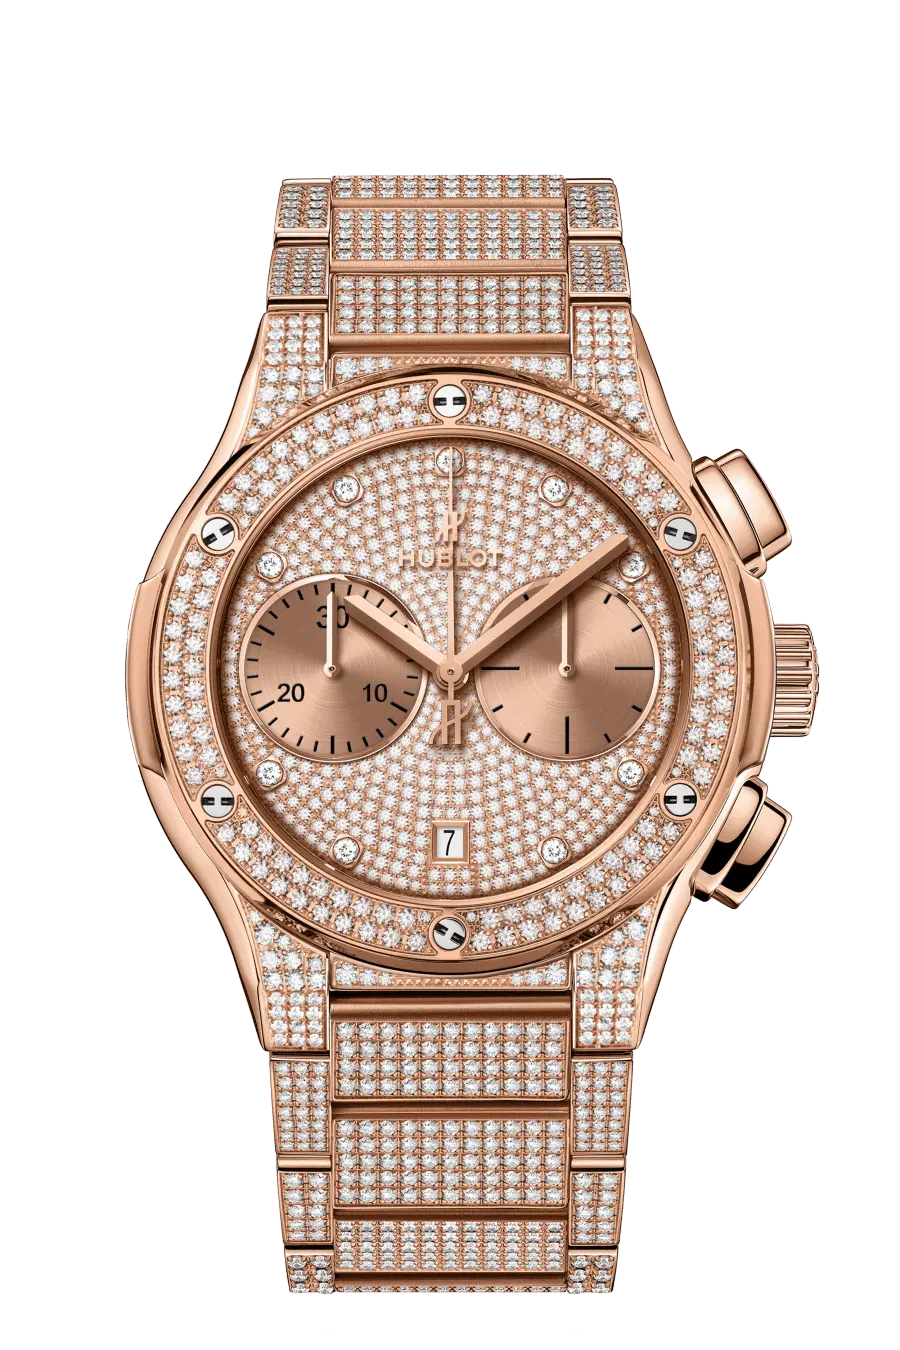 Classic Fusion Chronograph king Gold Wrist Watch by Hublot